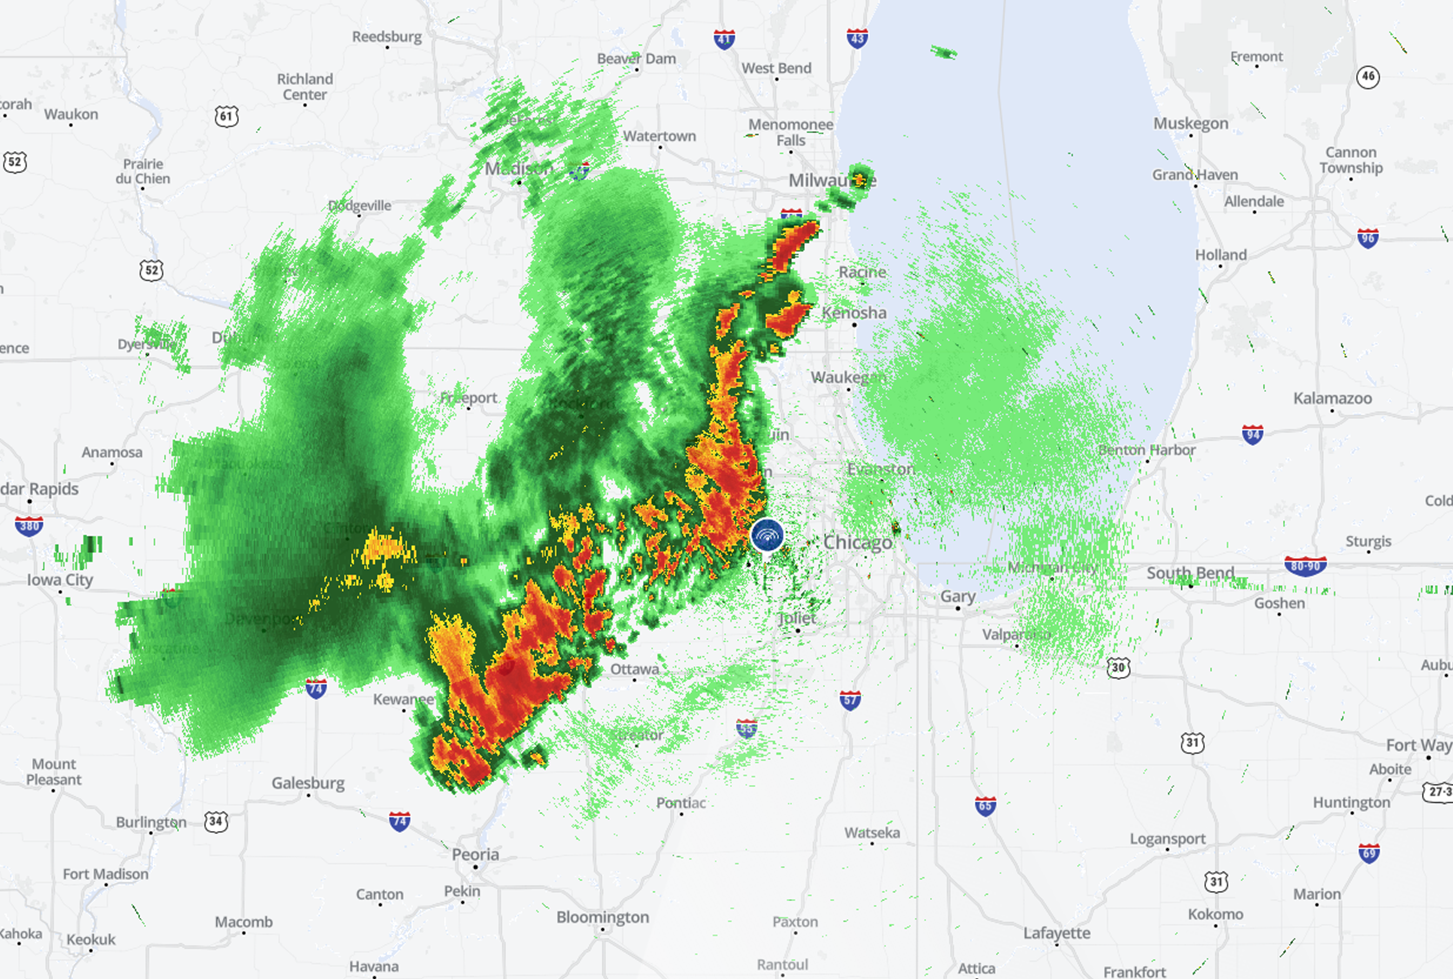 Track Storms as They Move Into Chicago Area Using Live Doppler 5 Radar